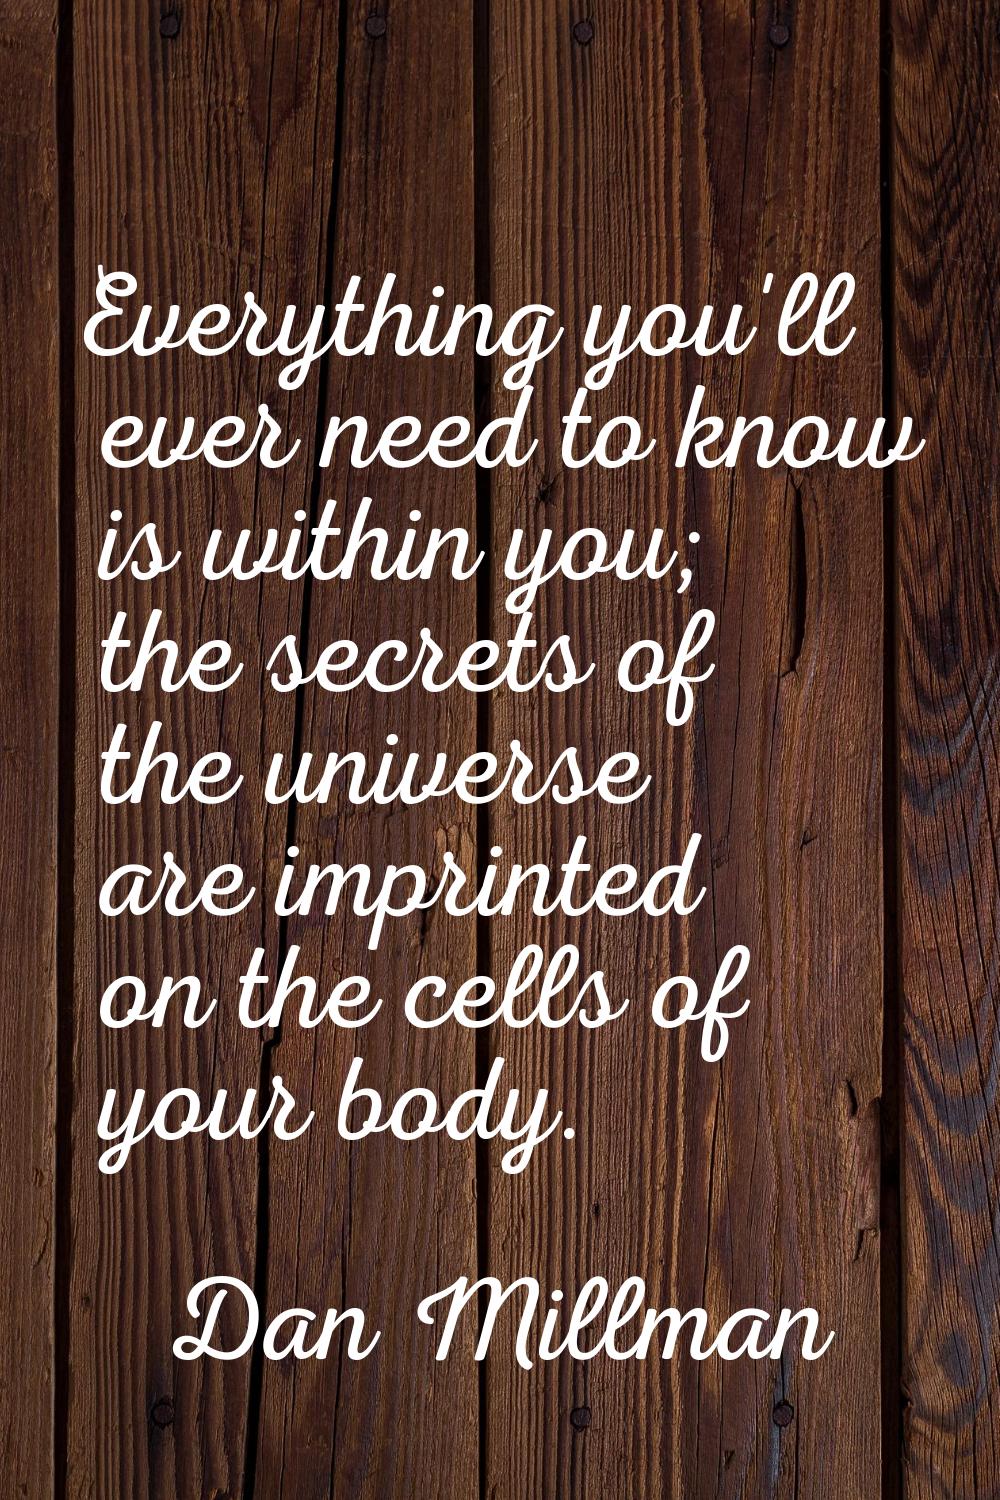 Everything you'll ever need to know is within you; the secrets of the universe are imprinted on the